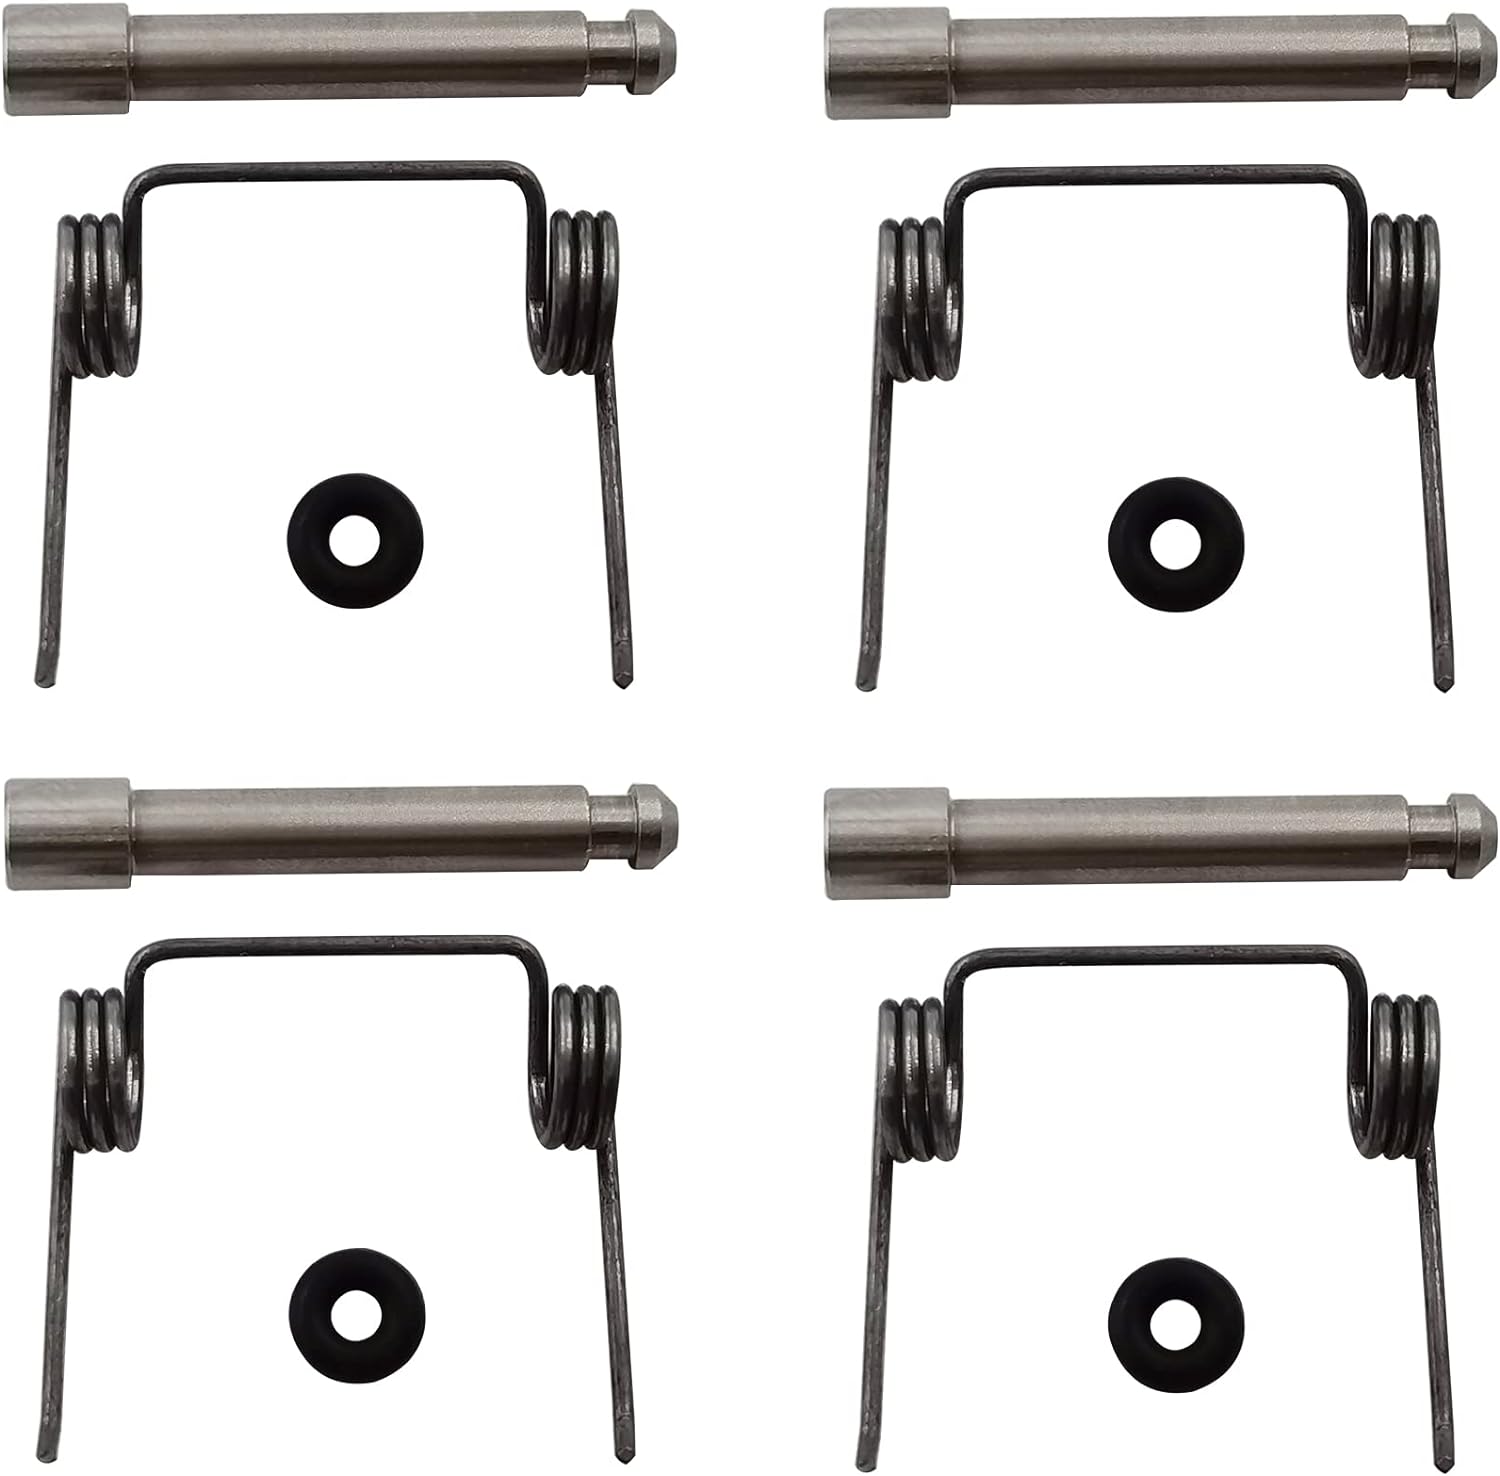 QINCIO 4PACK 877-761 Feeder Spring 877-825 Feeder Shaft 877-826 Shaft Ring Washer Set Compatible with Coil Roofing Nailer NV45AB NV45A